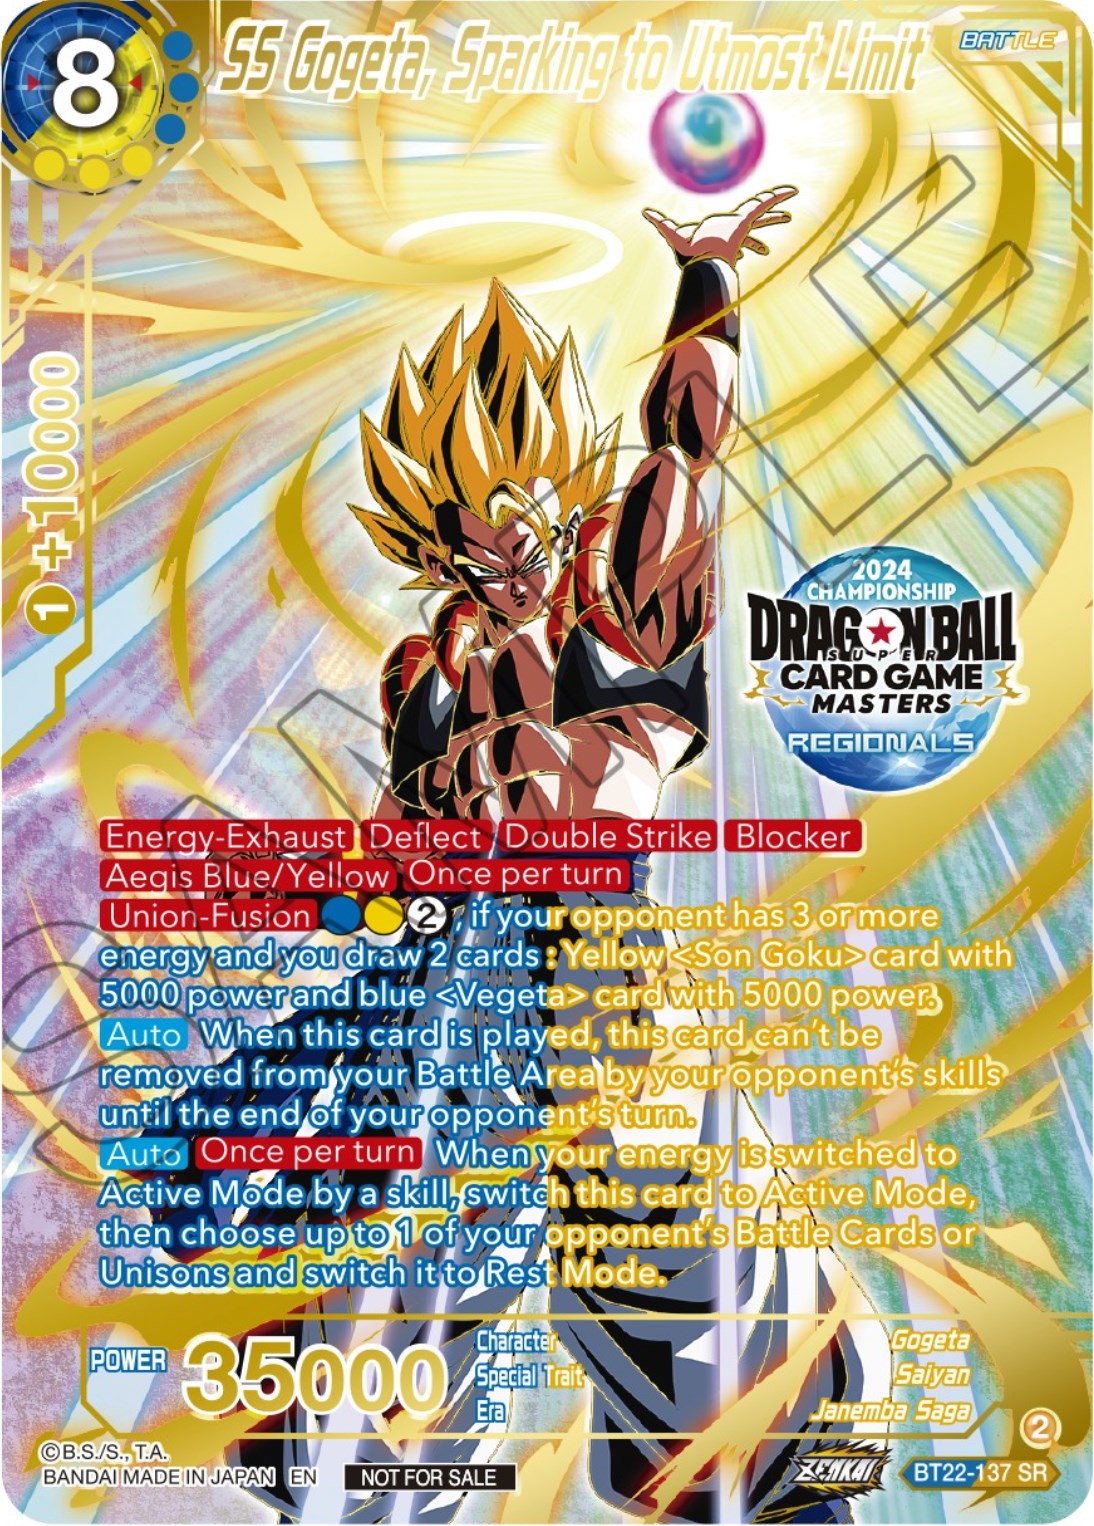 SS Gogeta, Sparking to Utmost Limit (2024 Championship Regionals Top 16) (BT22-137) [Tournament Promotion Cards] | North Valley Games